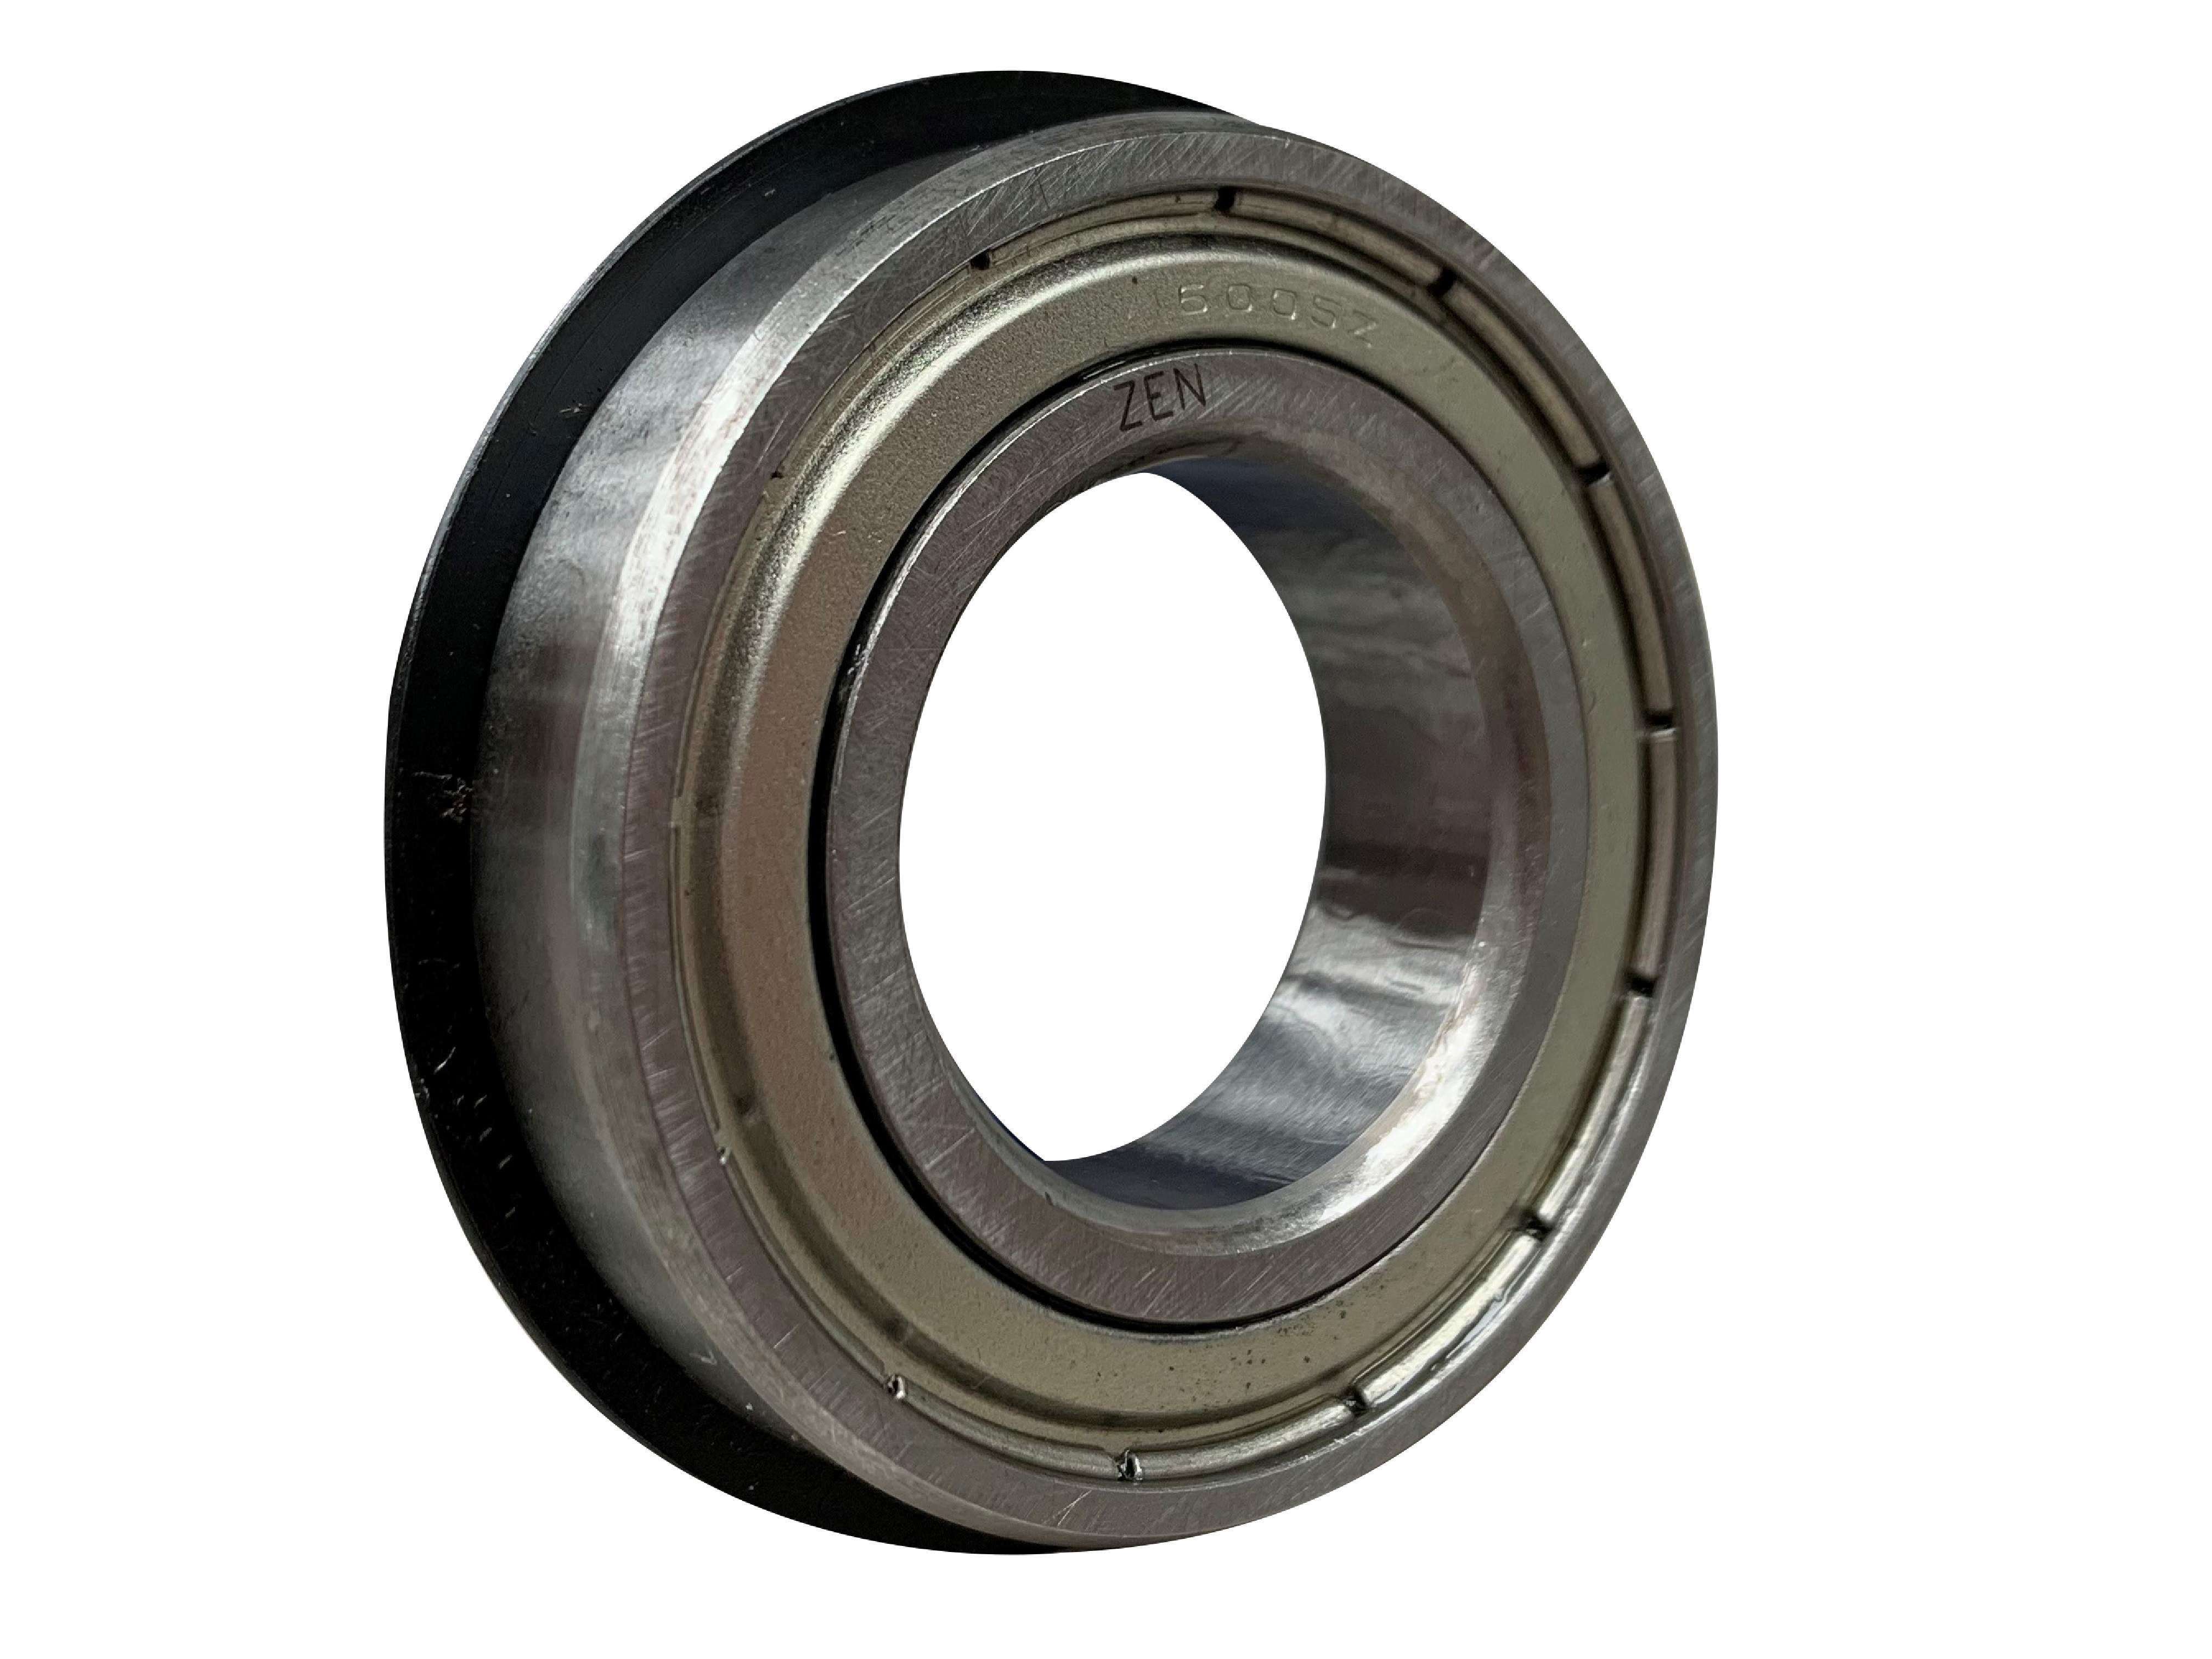 ZEN 6004-2Z-NR Shielded Ball Bearing With Snap Ring 20mm x 42mm x 12mm